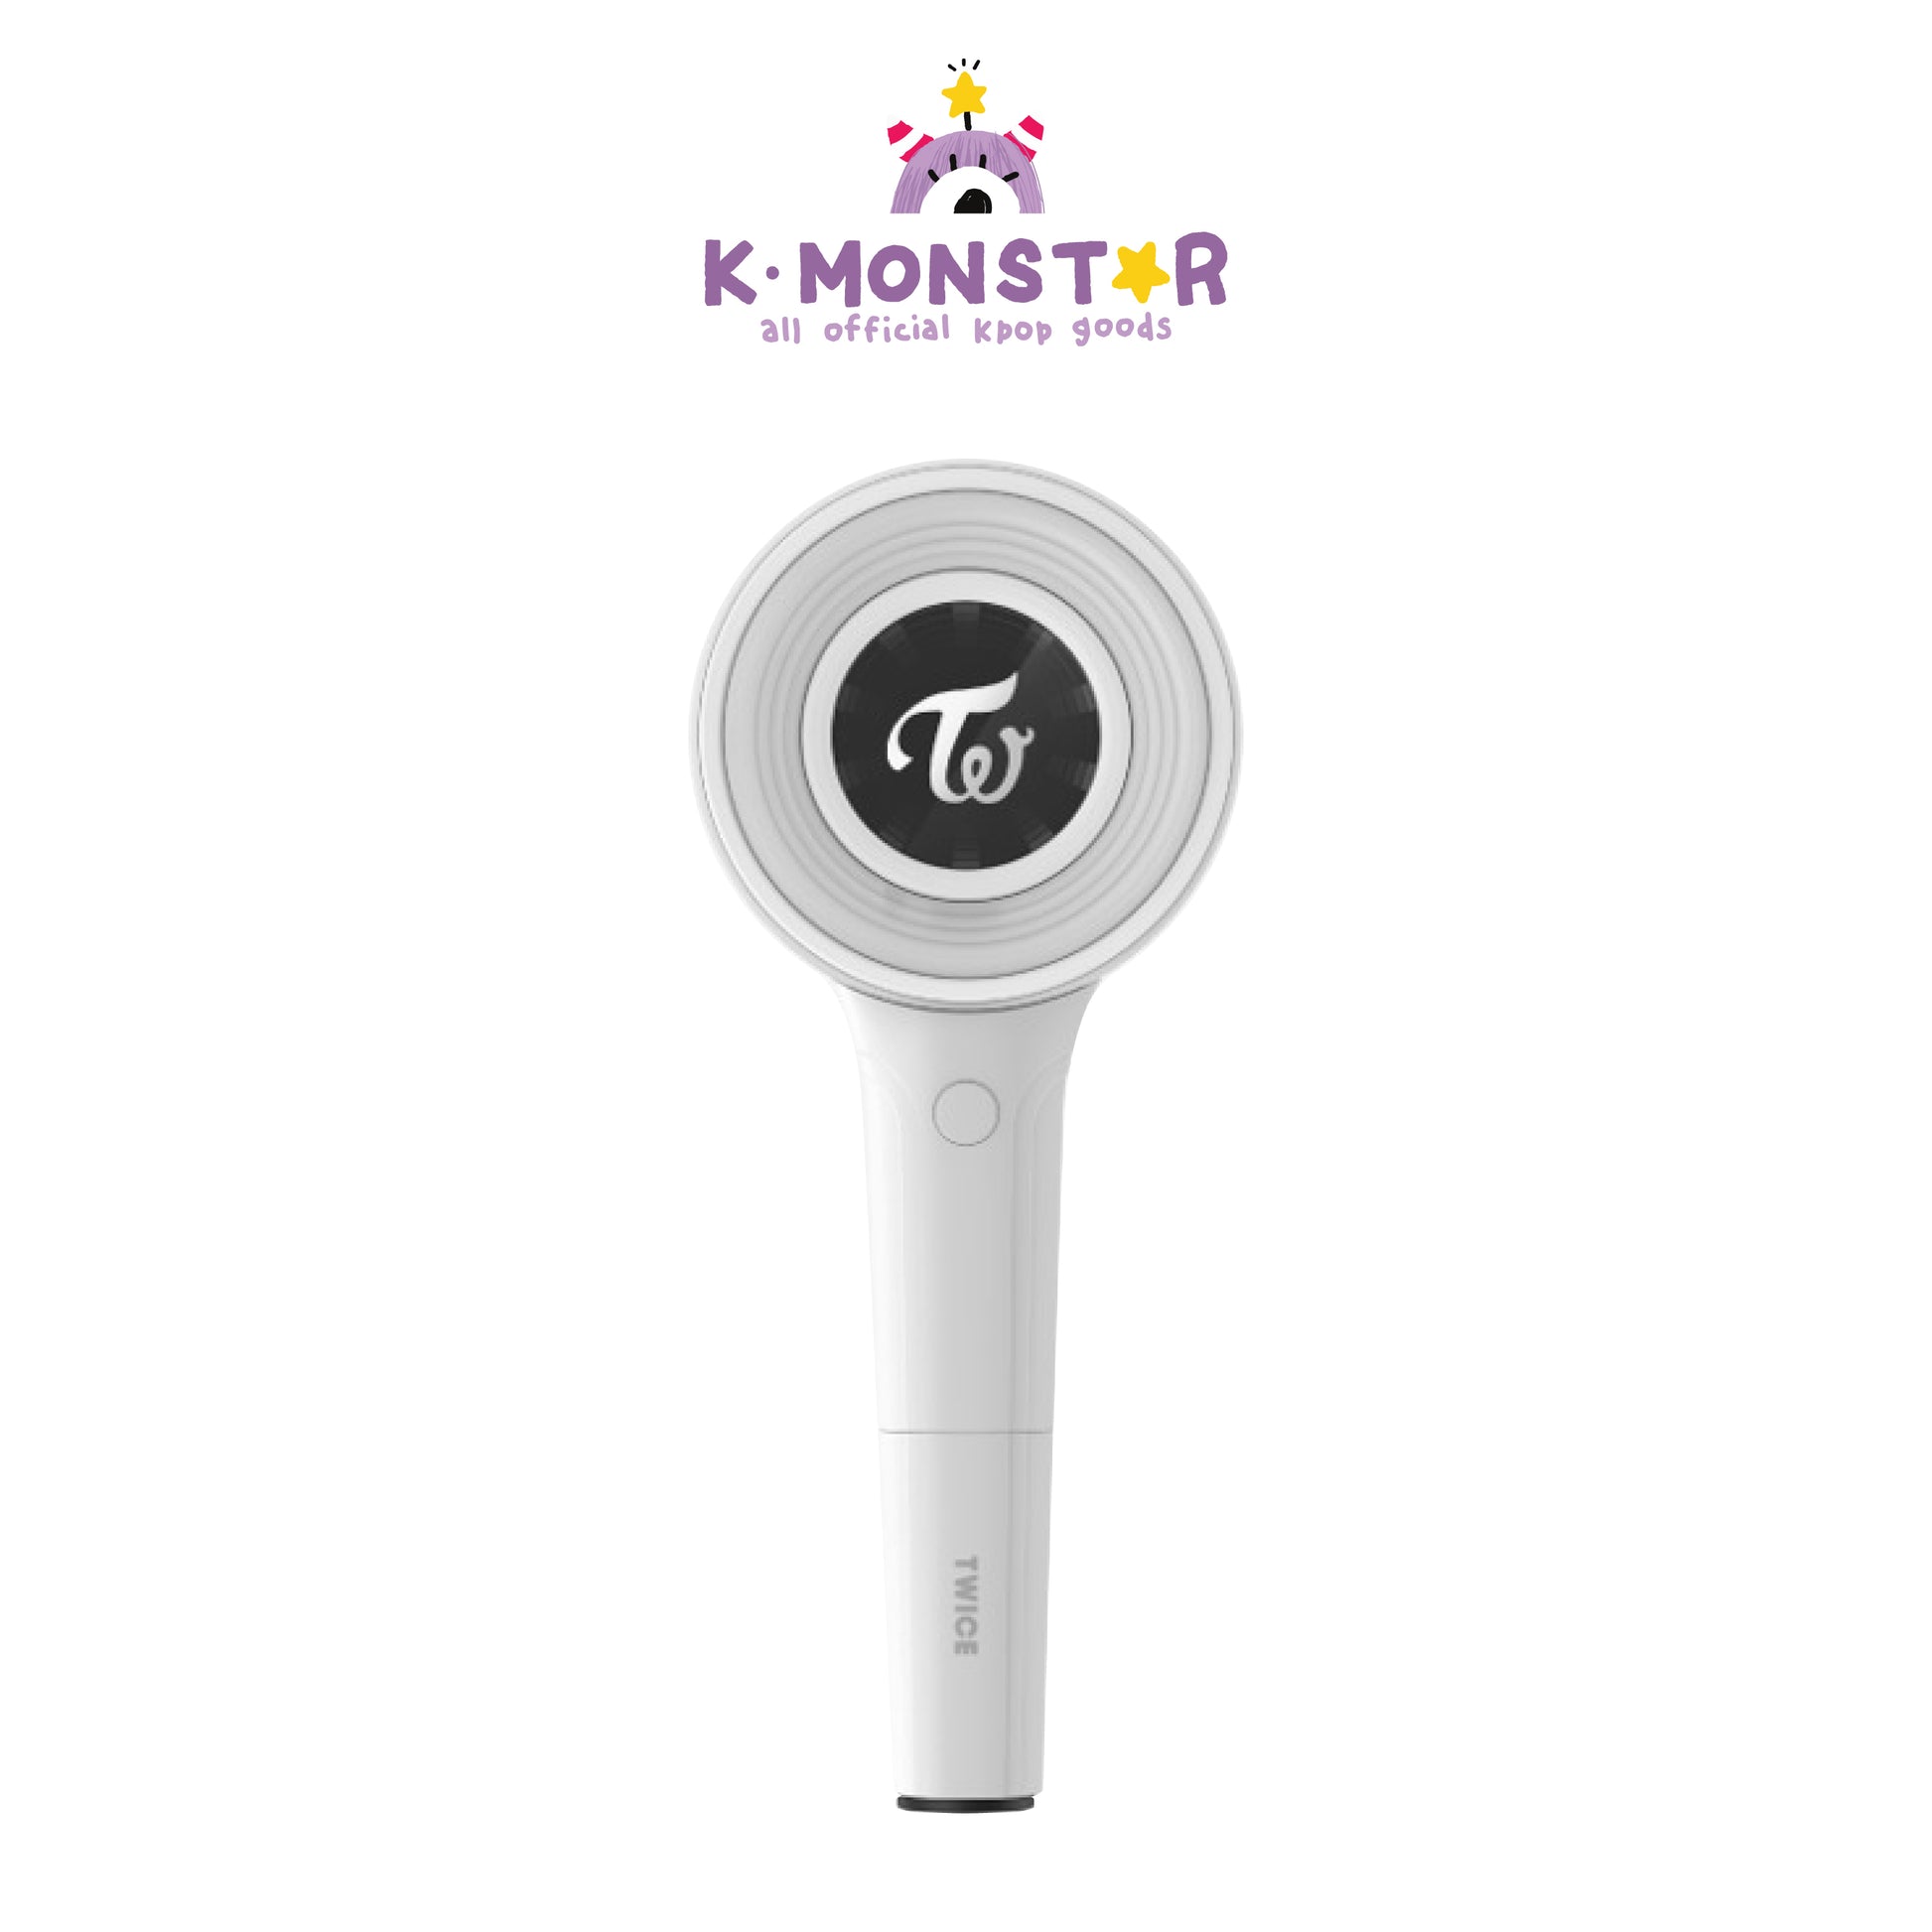 TWICE OFFICIAL LIGHT STICK CANDYBONG Z